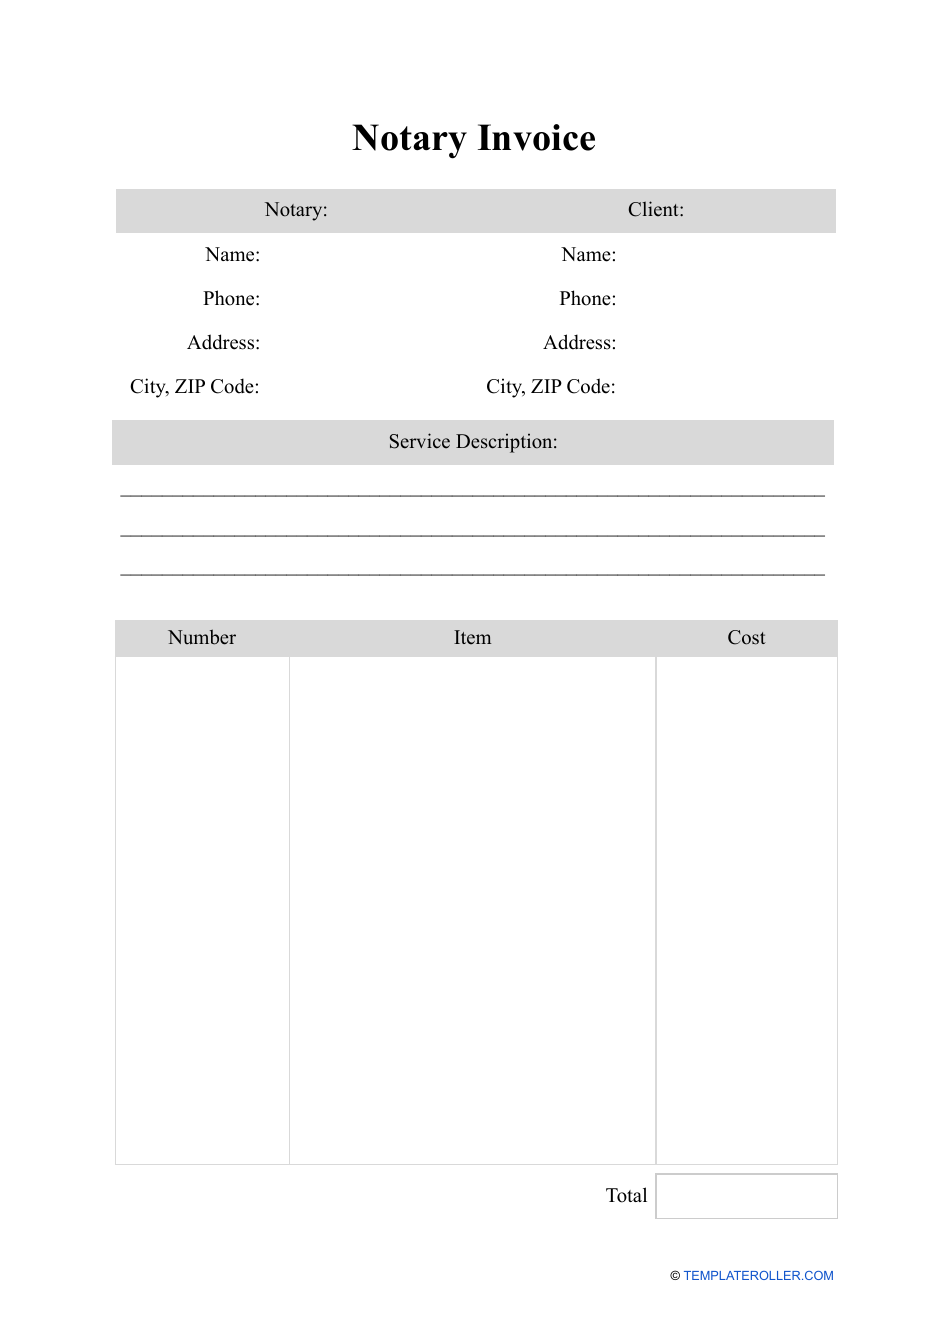 notary-invoice-template-fill-out-sign-online-and-download-pdf